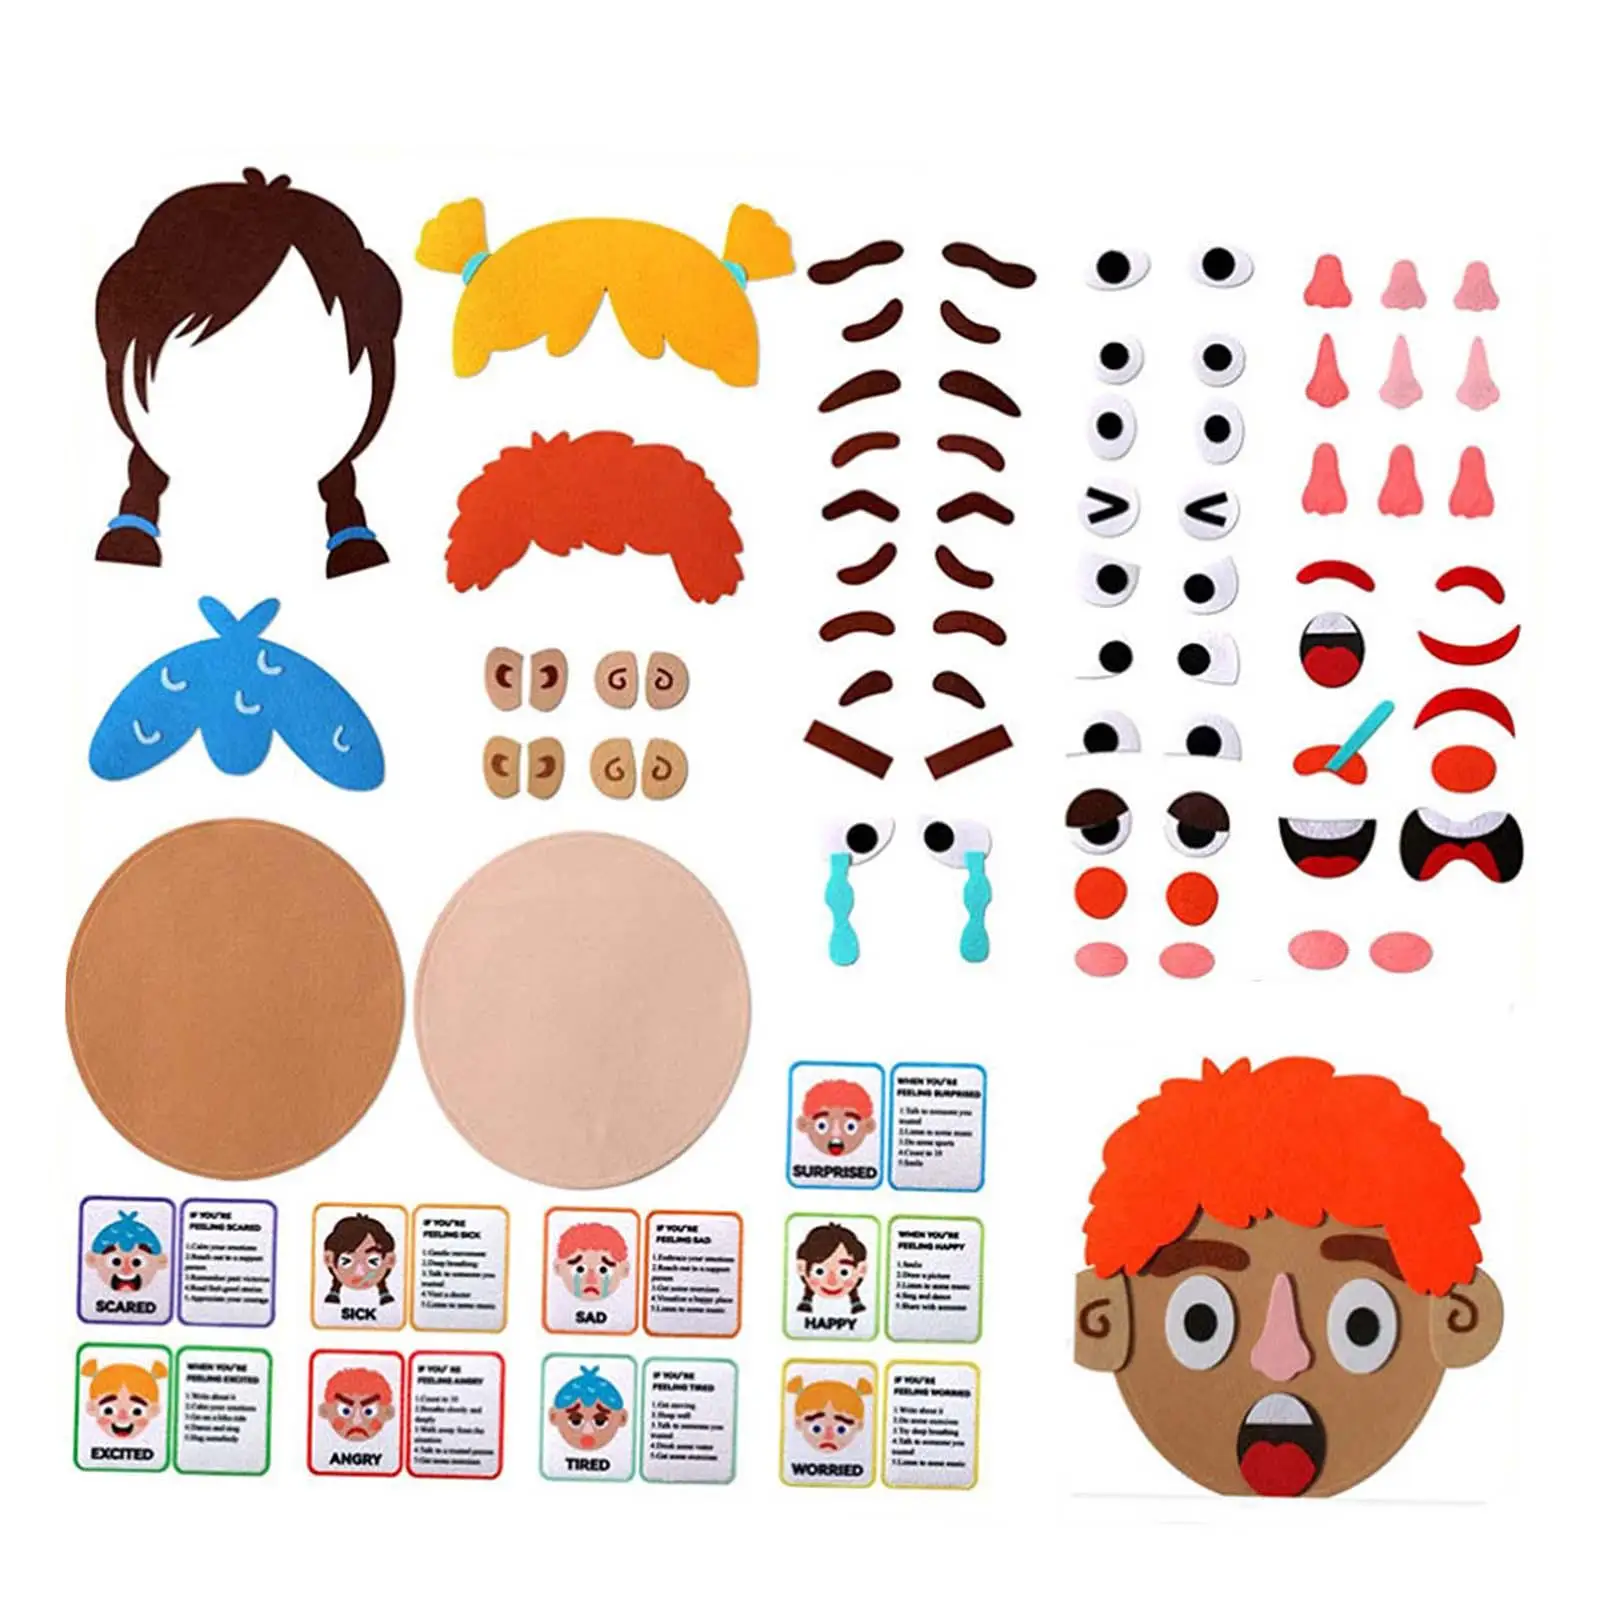 Kids Social Emotional Learning Busy Board Faces Stickers Games for Boys Kids